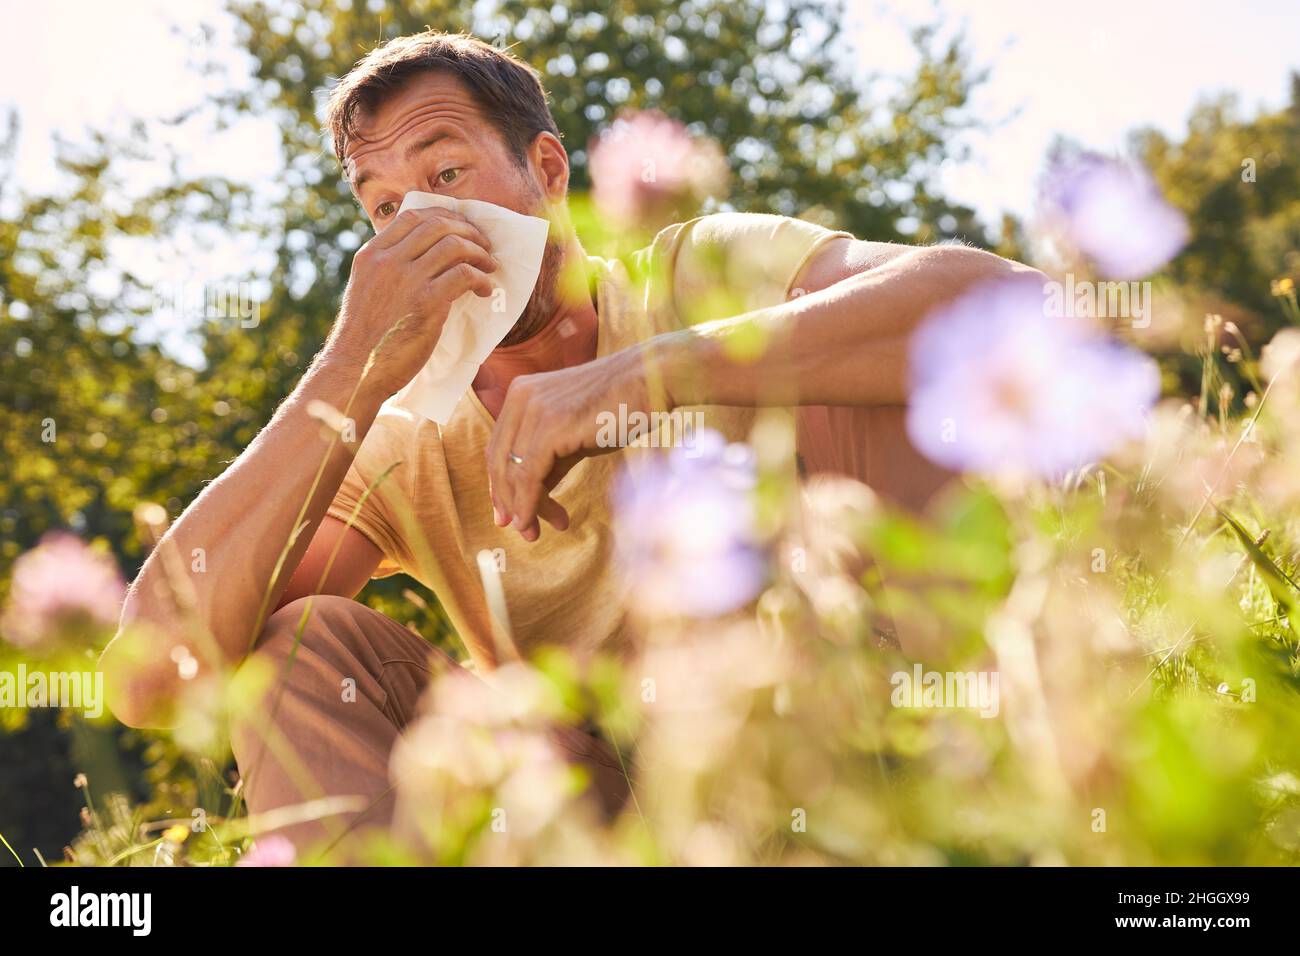 Man with a runny nose sneezing into a handkerchief in a blooming meadow in summer Stock Photo